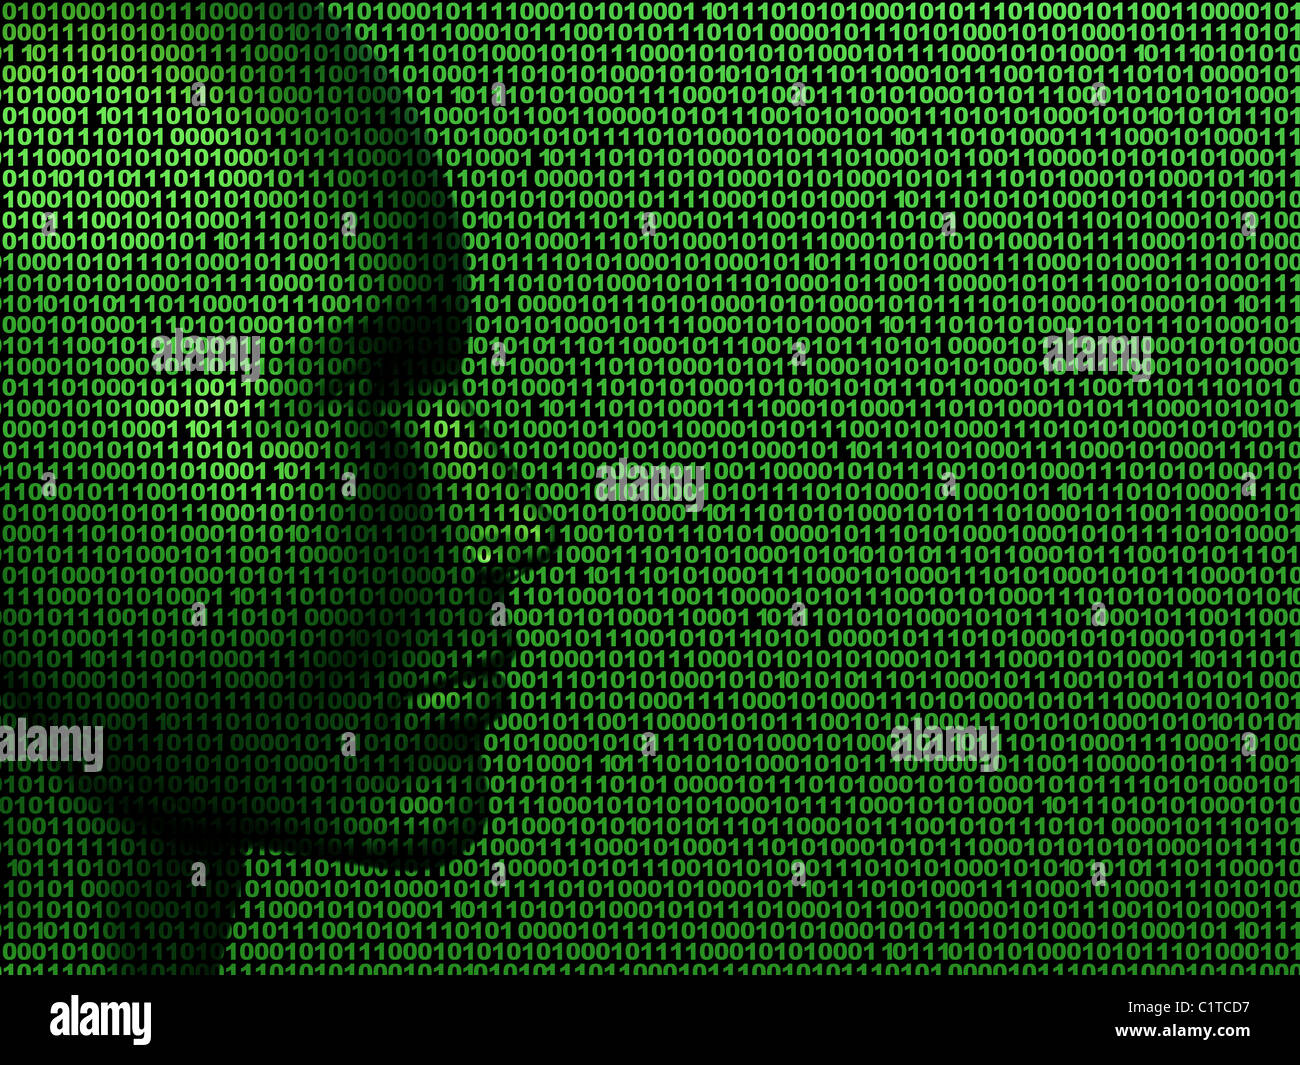 Illustration of a face made up of binary computer code Stock Photo